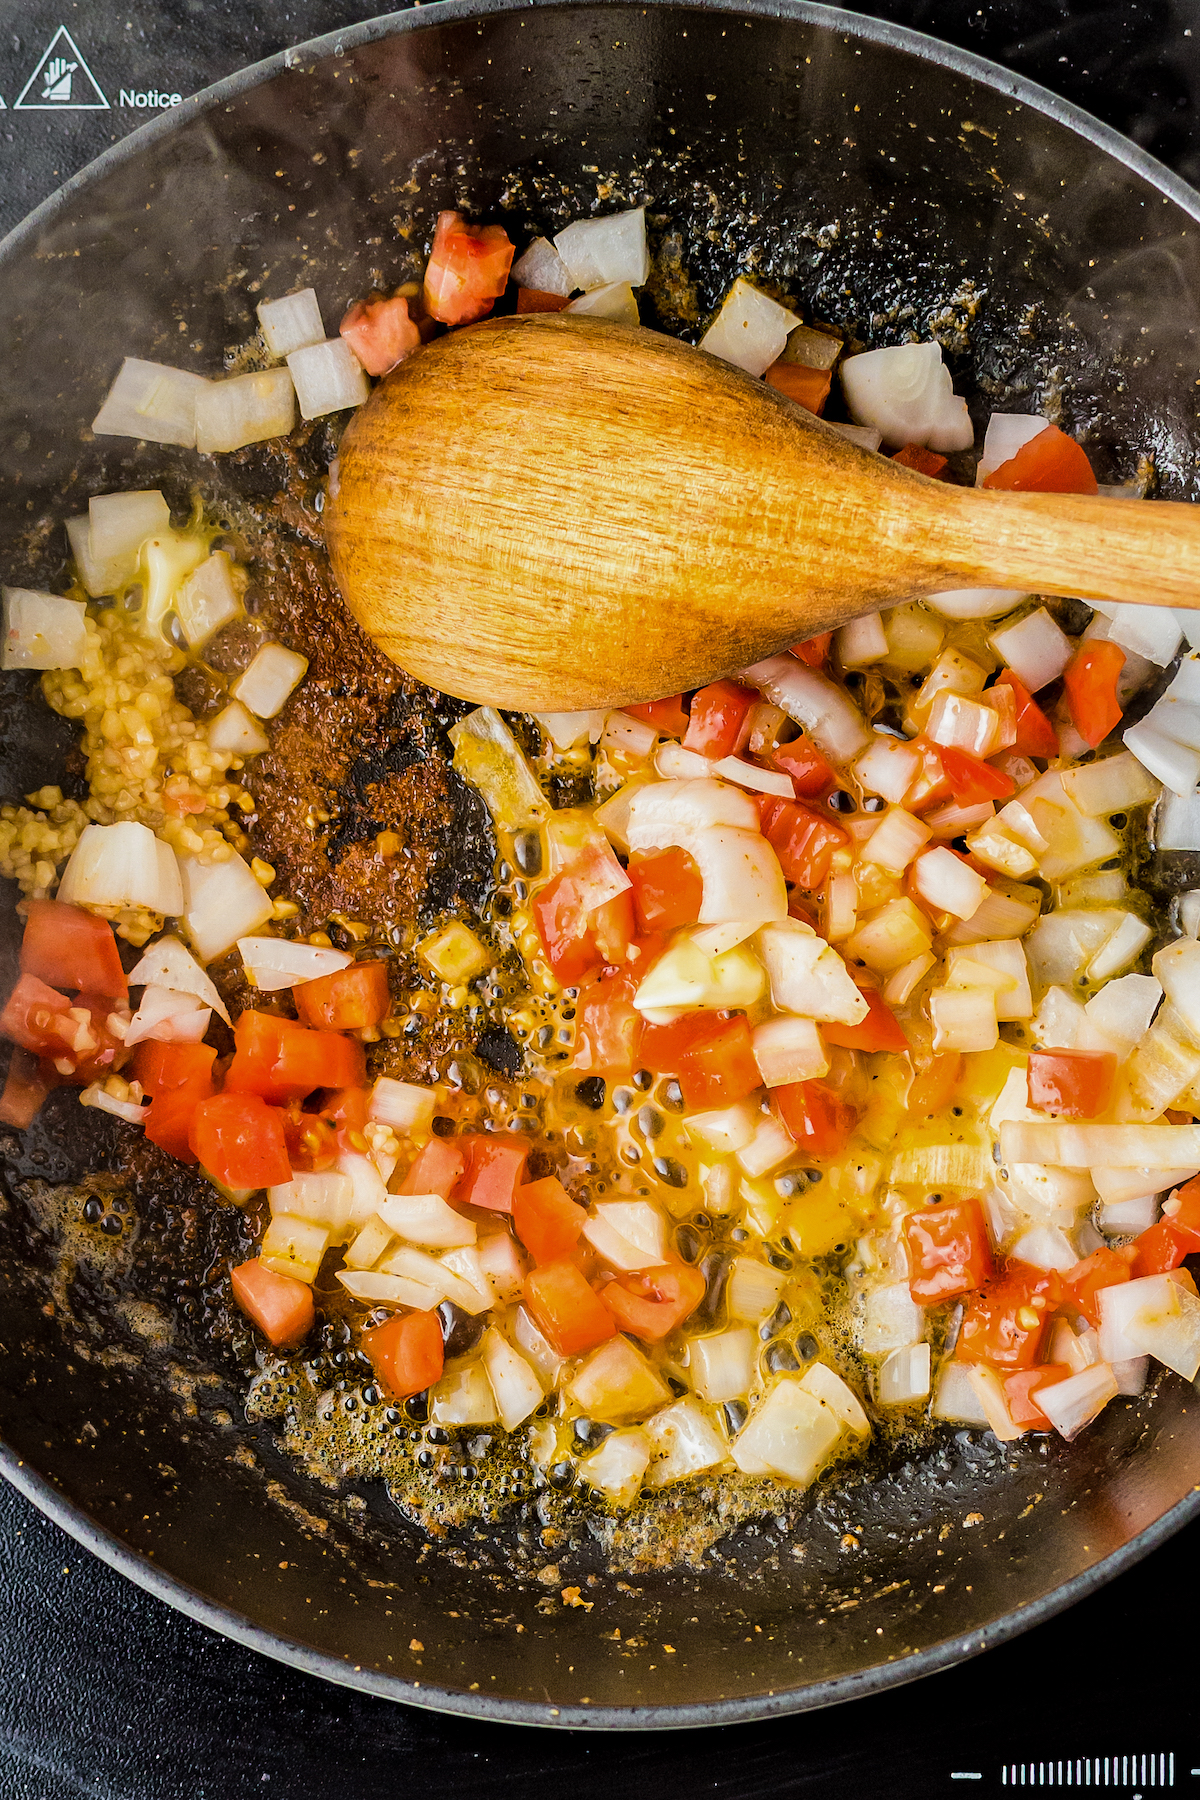 Onion, tomato, and garlic cooking in a skillet.